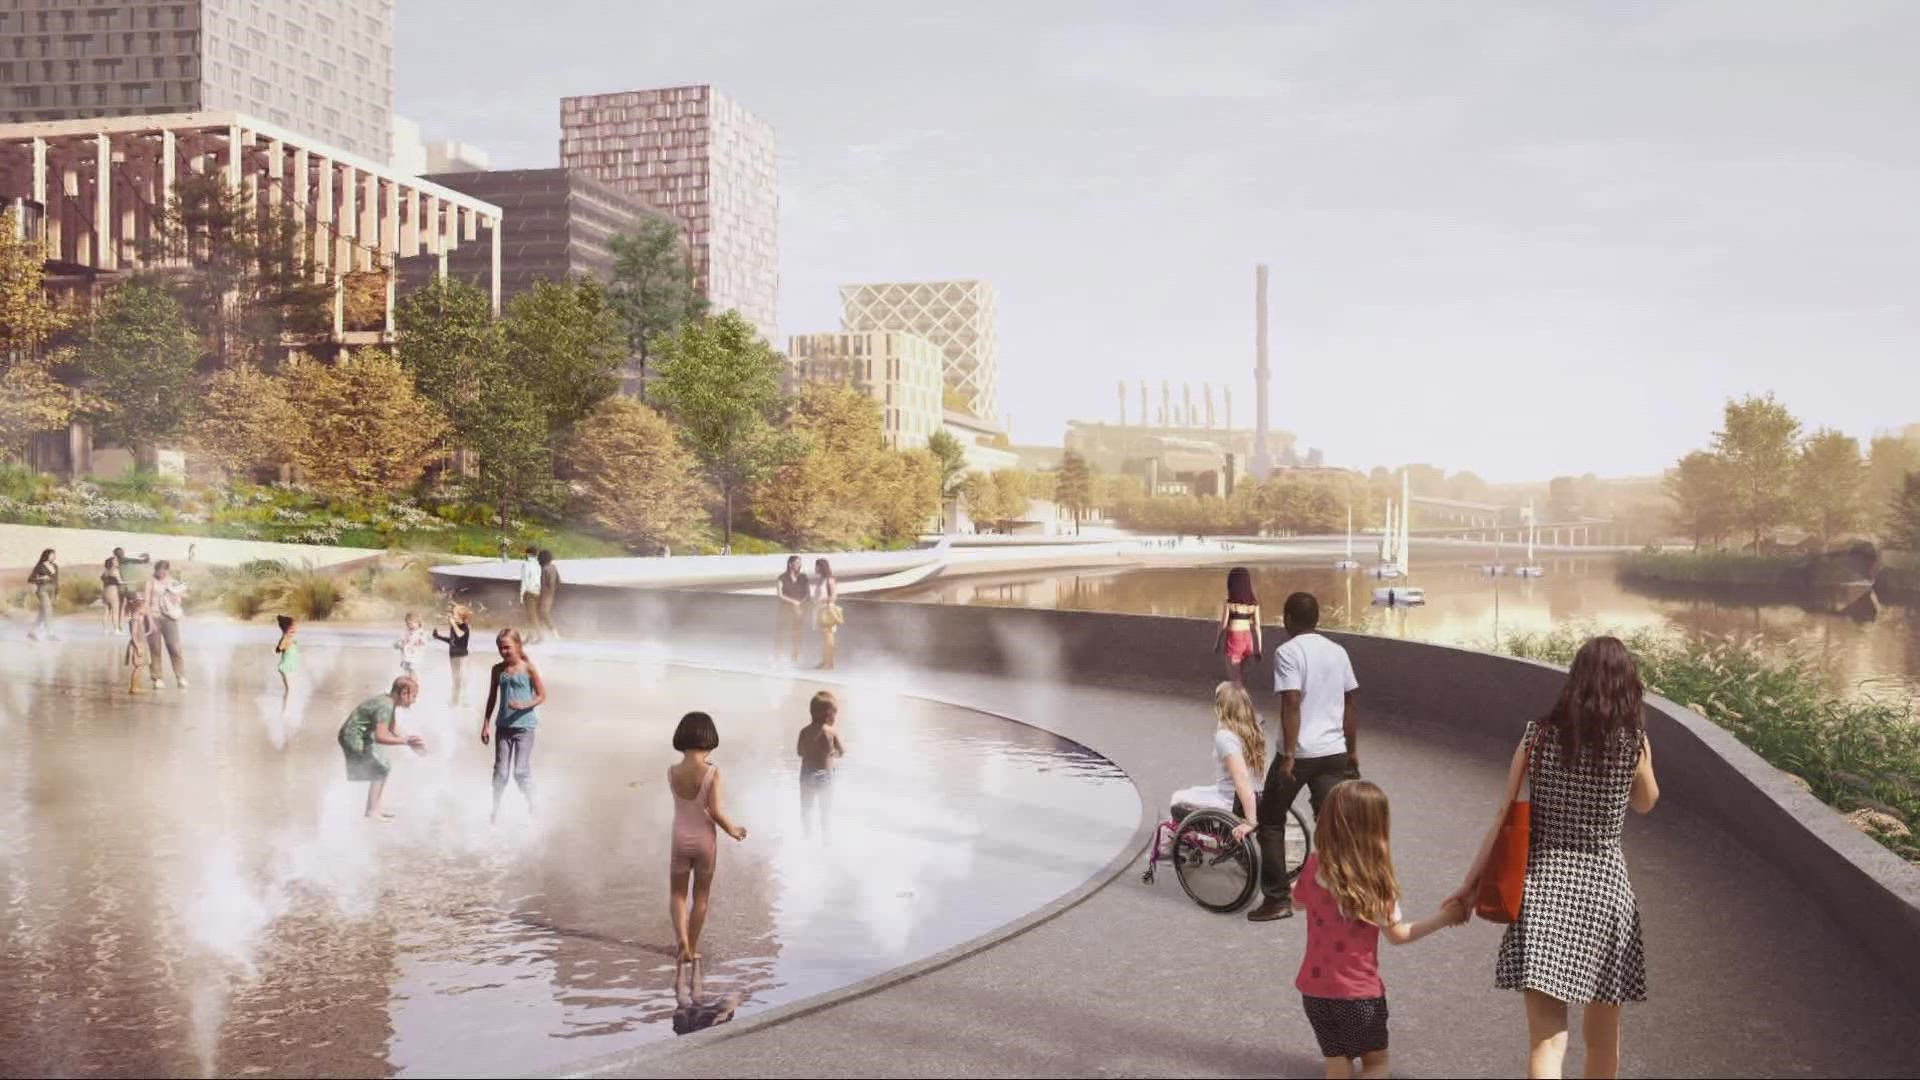 Real estate company Bedrock unveiled its plans for Cleveland's Cuyahoga Riverfront on Friday.